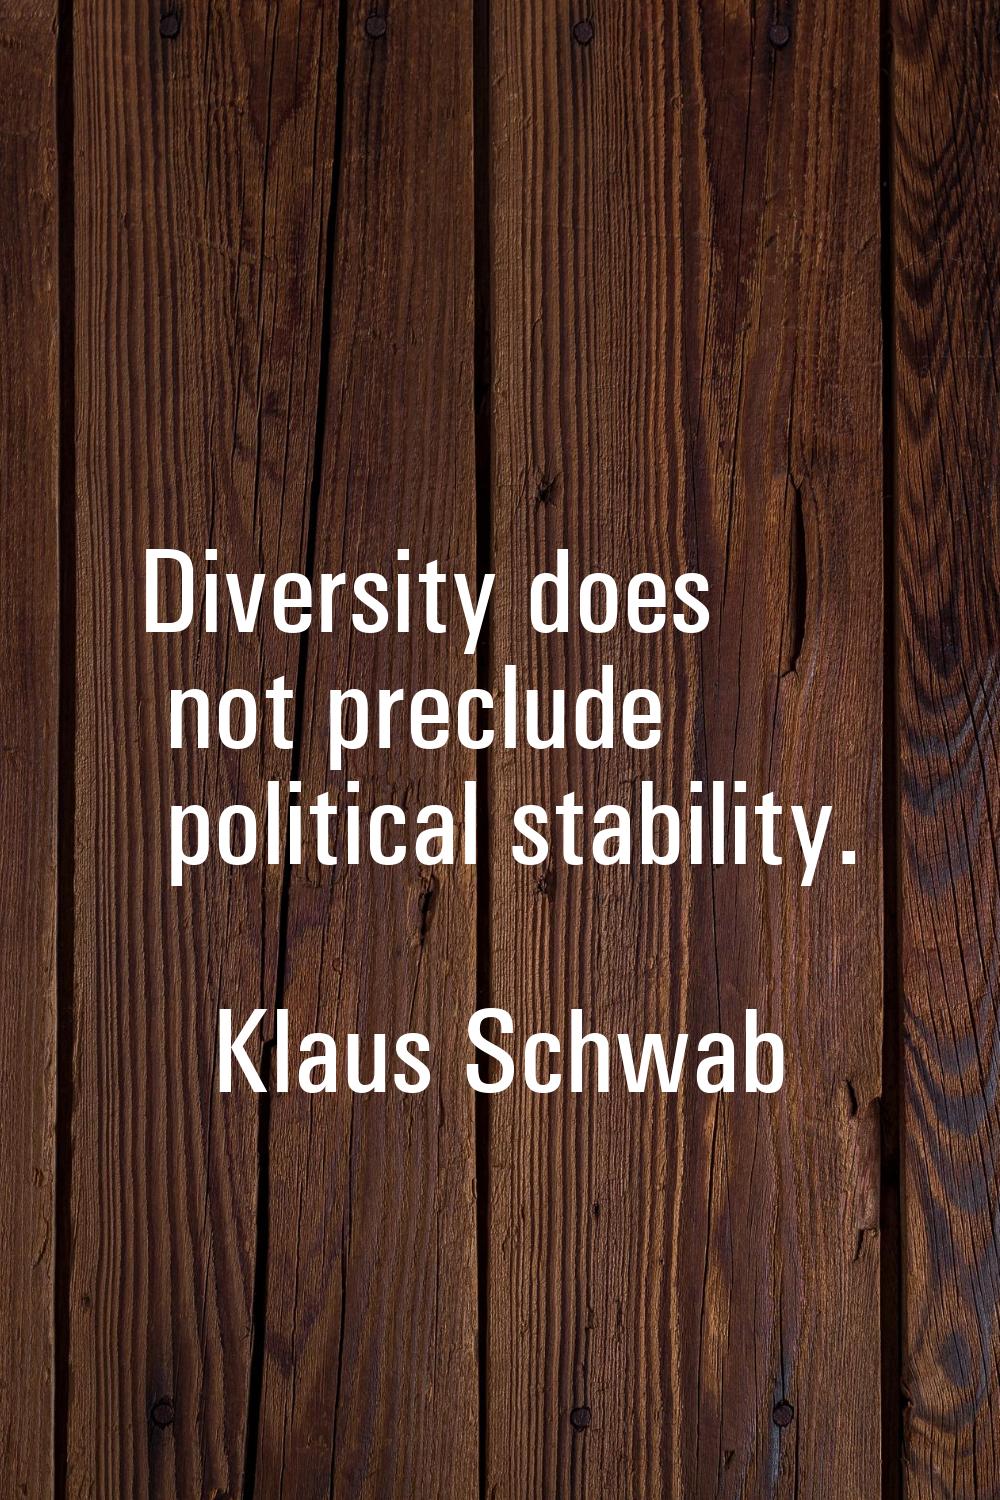 Diversity does not preclude political stability.